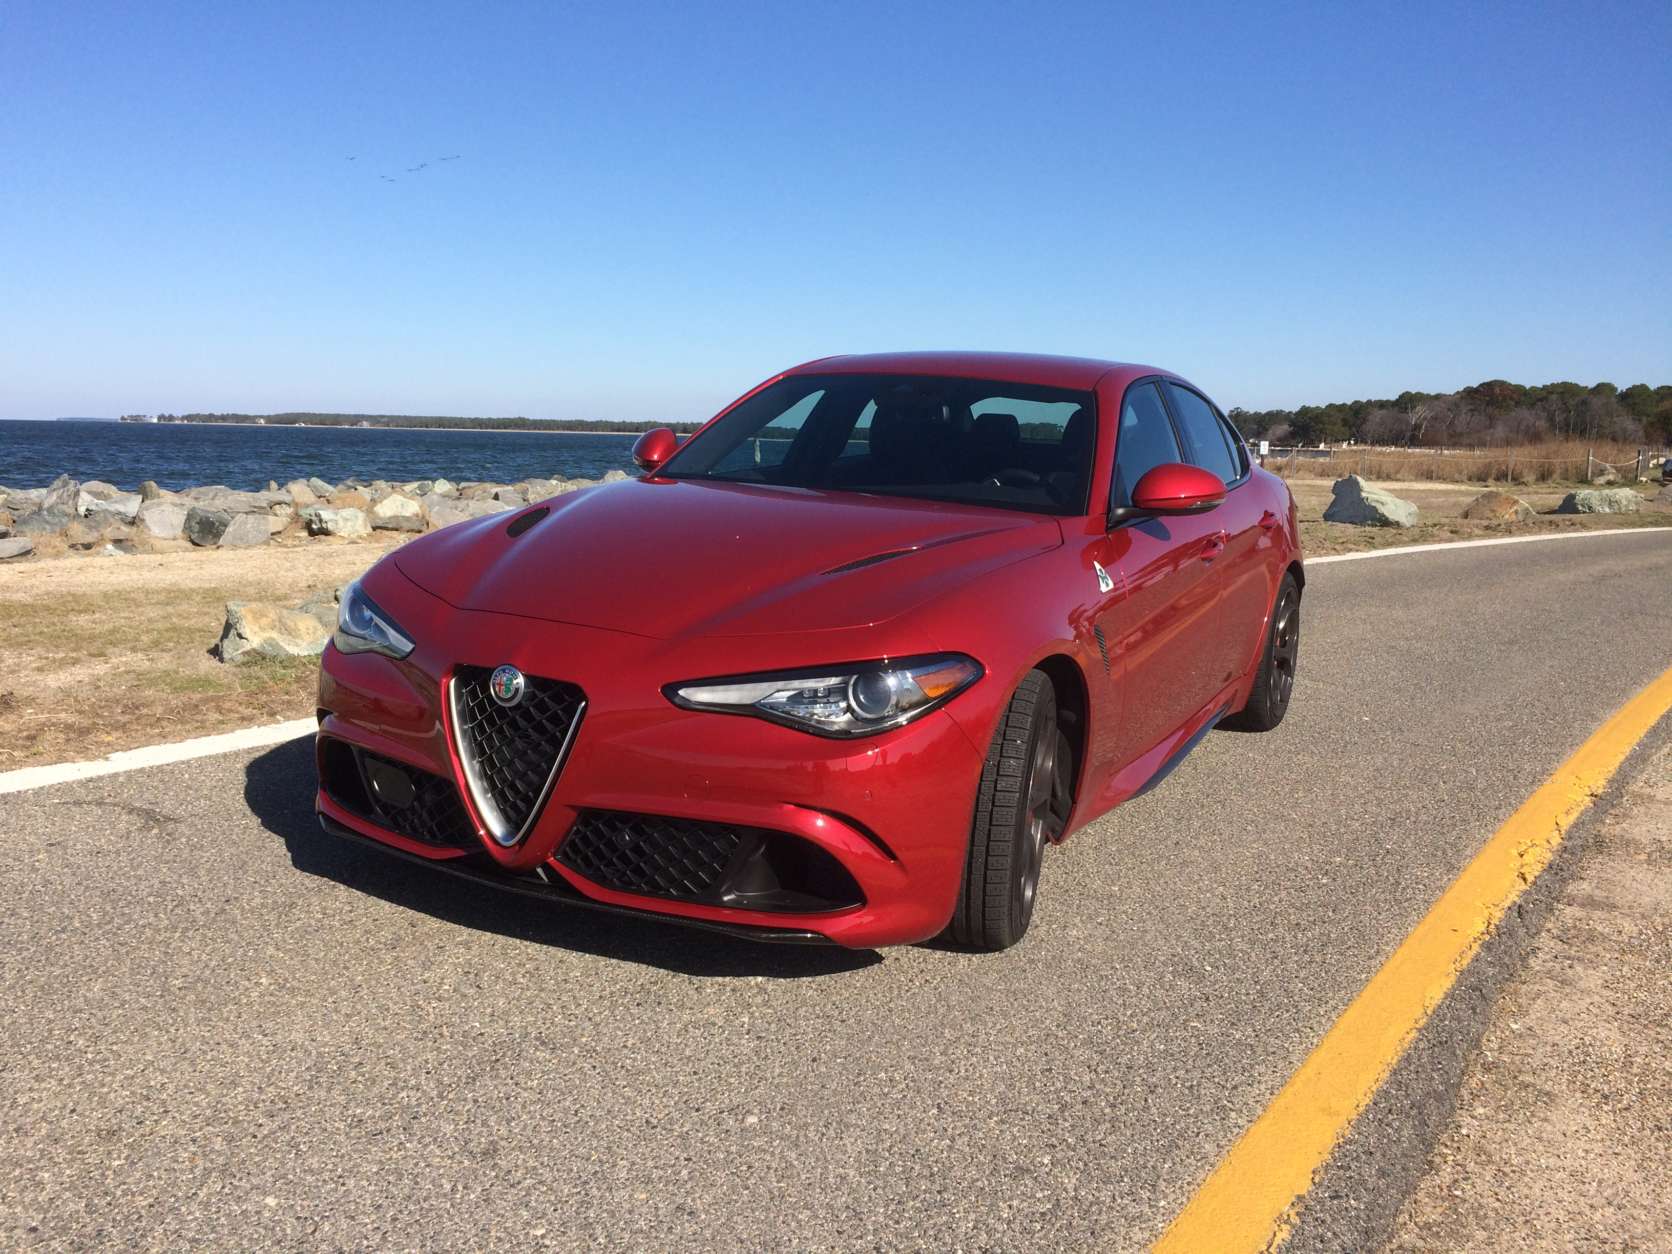 The $72,000 Alfa Romeo Giulia Quadrifoglio is the top-of-the-line high performance variant of the Giulia line with a very powerful 2.9L biturbo V-6 with 505 horsepower that really moves this sedan. (WTOP/Mike Parris)